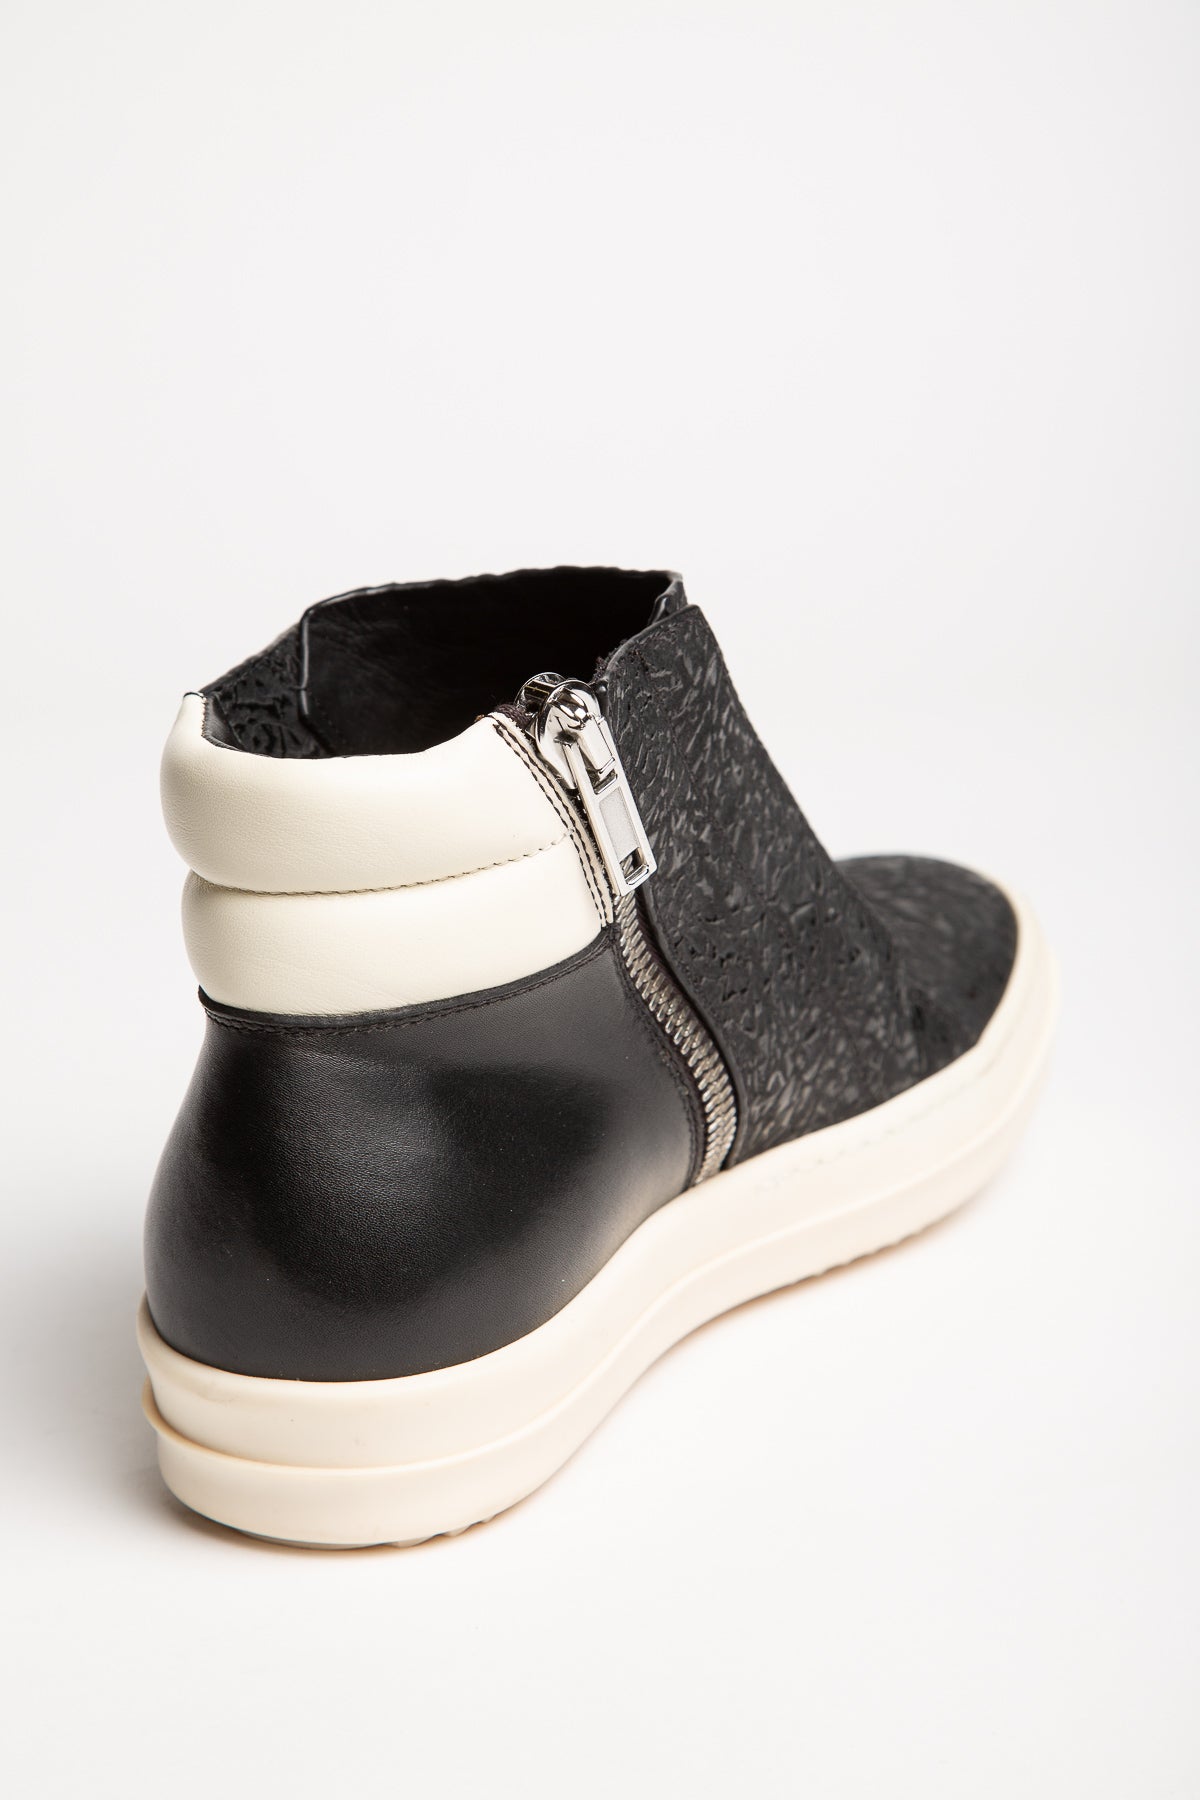 RICK OWENS | ISLAND DUNK COMBO SNEAKERS